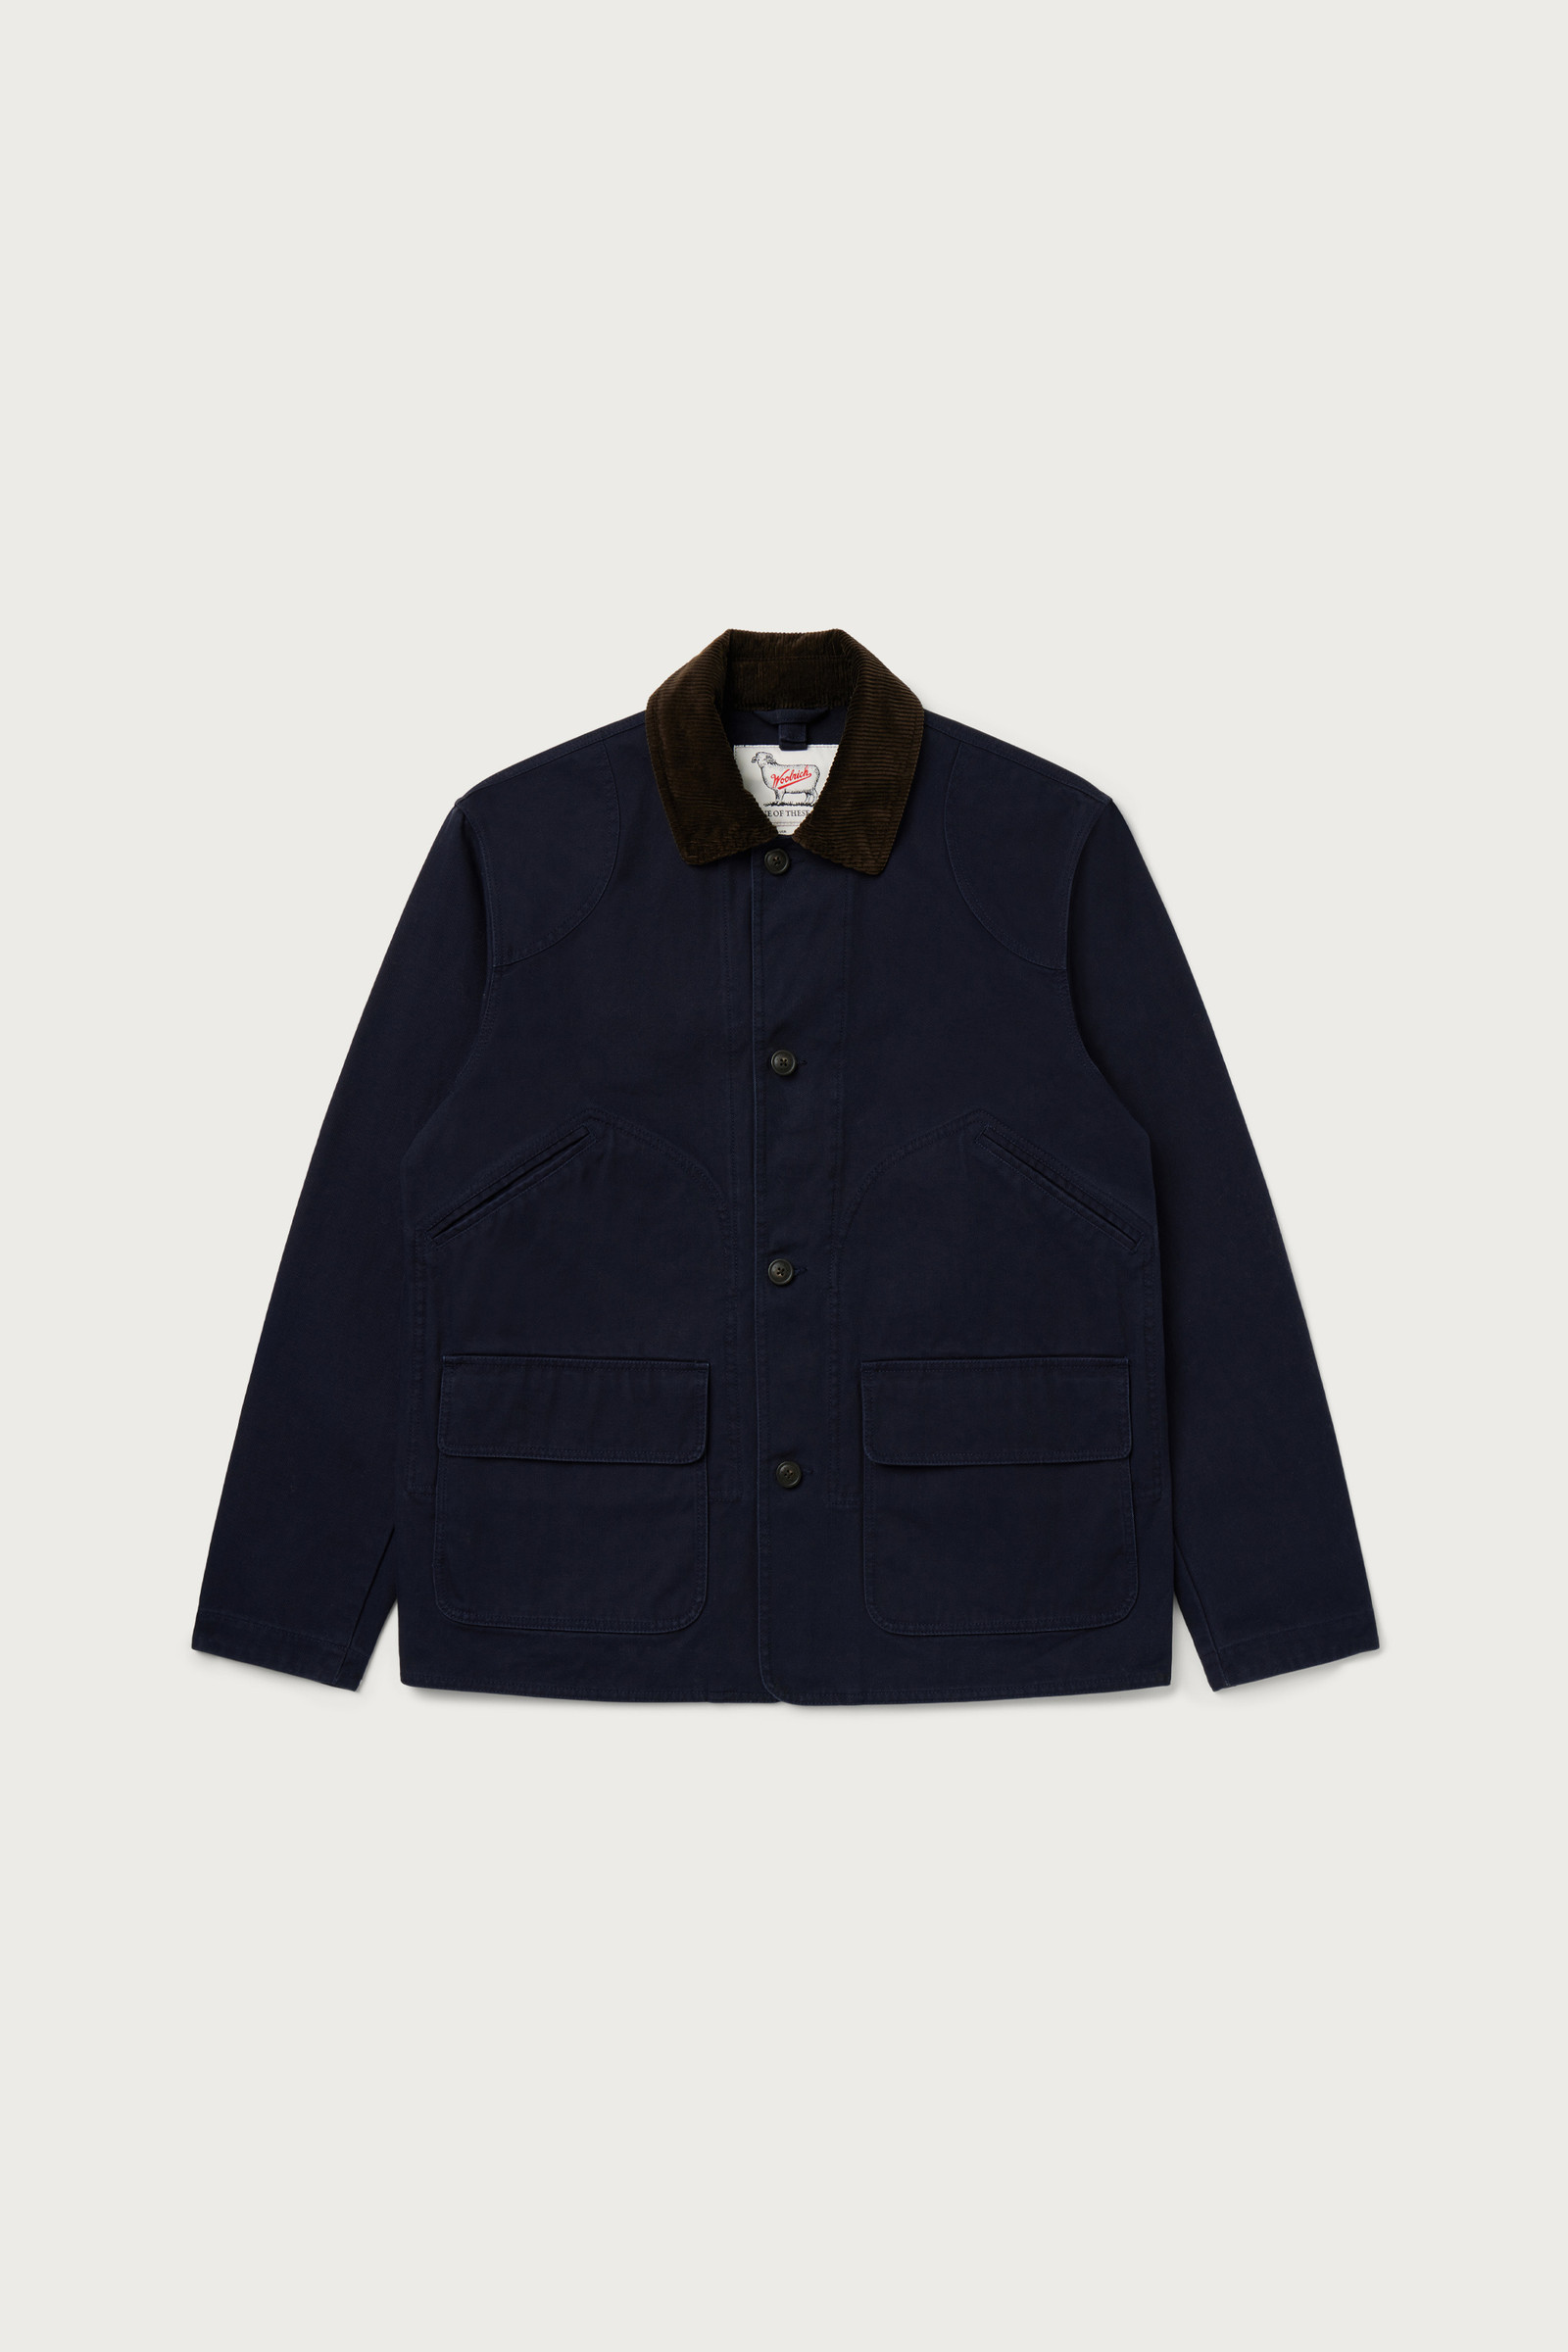 3-in-1 Jacket in Pure Cotton - One Of These Days / Woolrich - Men - Blue